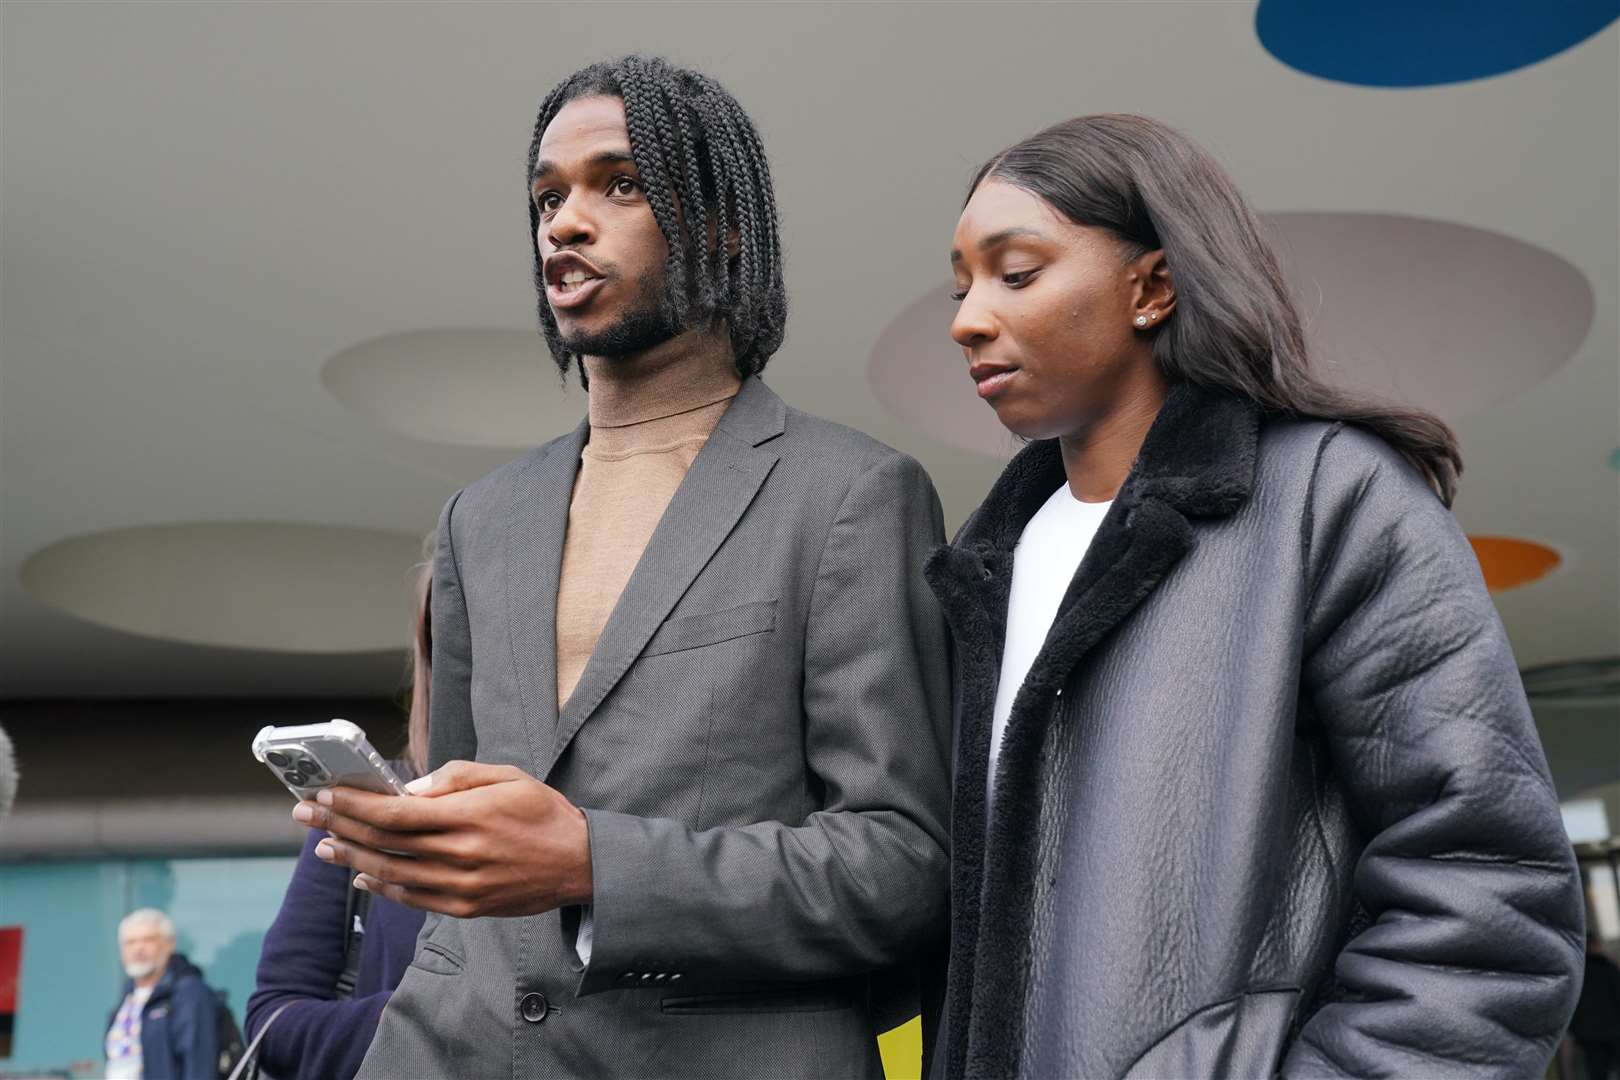 Athletes Bianca Williams and Ricardo Dos Santos speak to the media outside Palestra House, central London, after the judgement was given for the gross misconduct hearing of five Metropolitan Police officers over their stop and search (Jonathan Brady/PA)